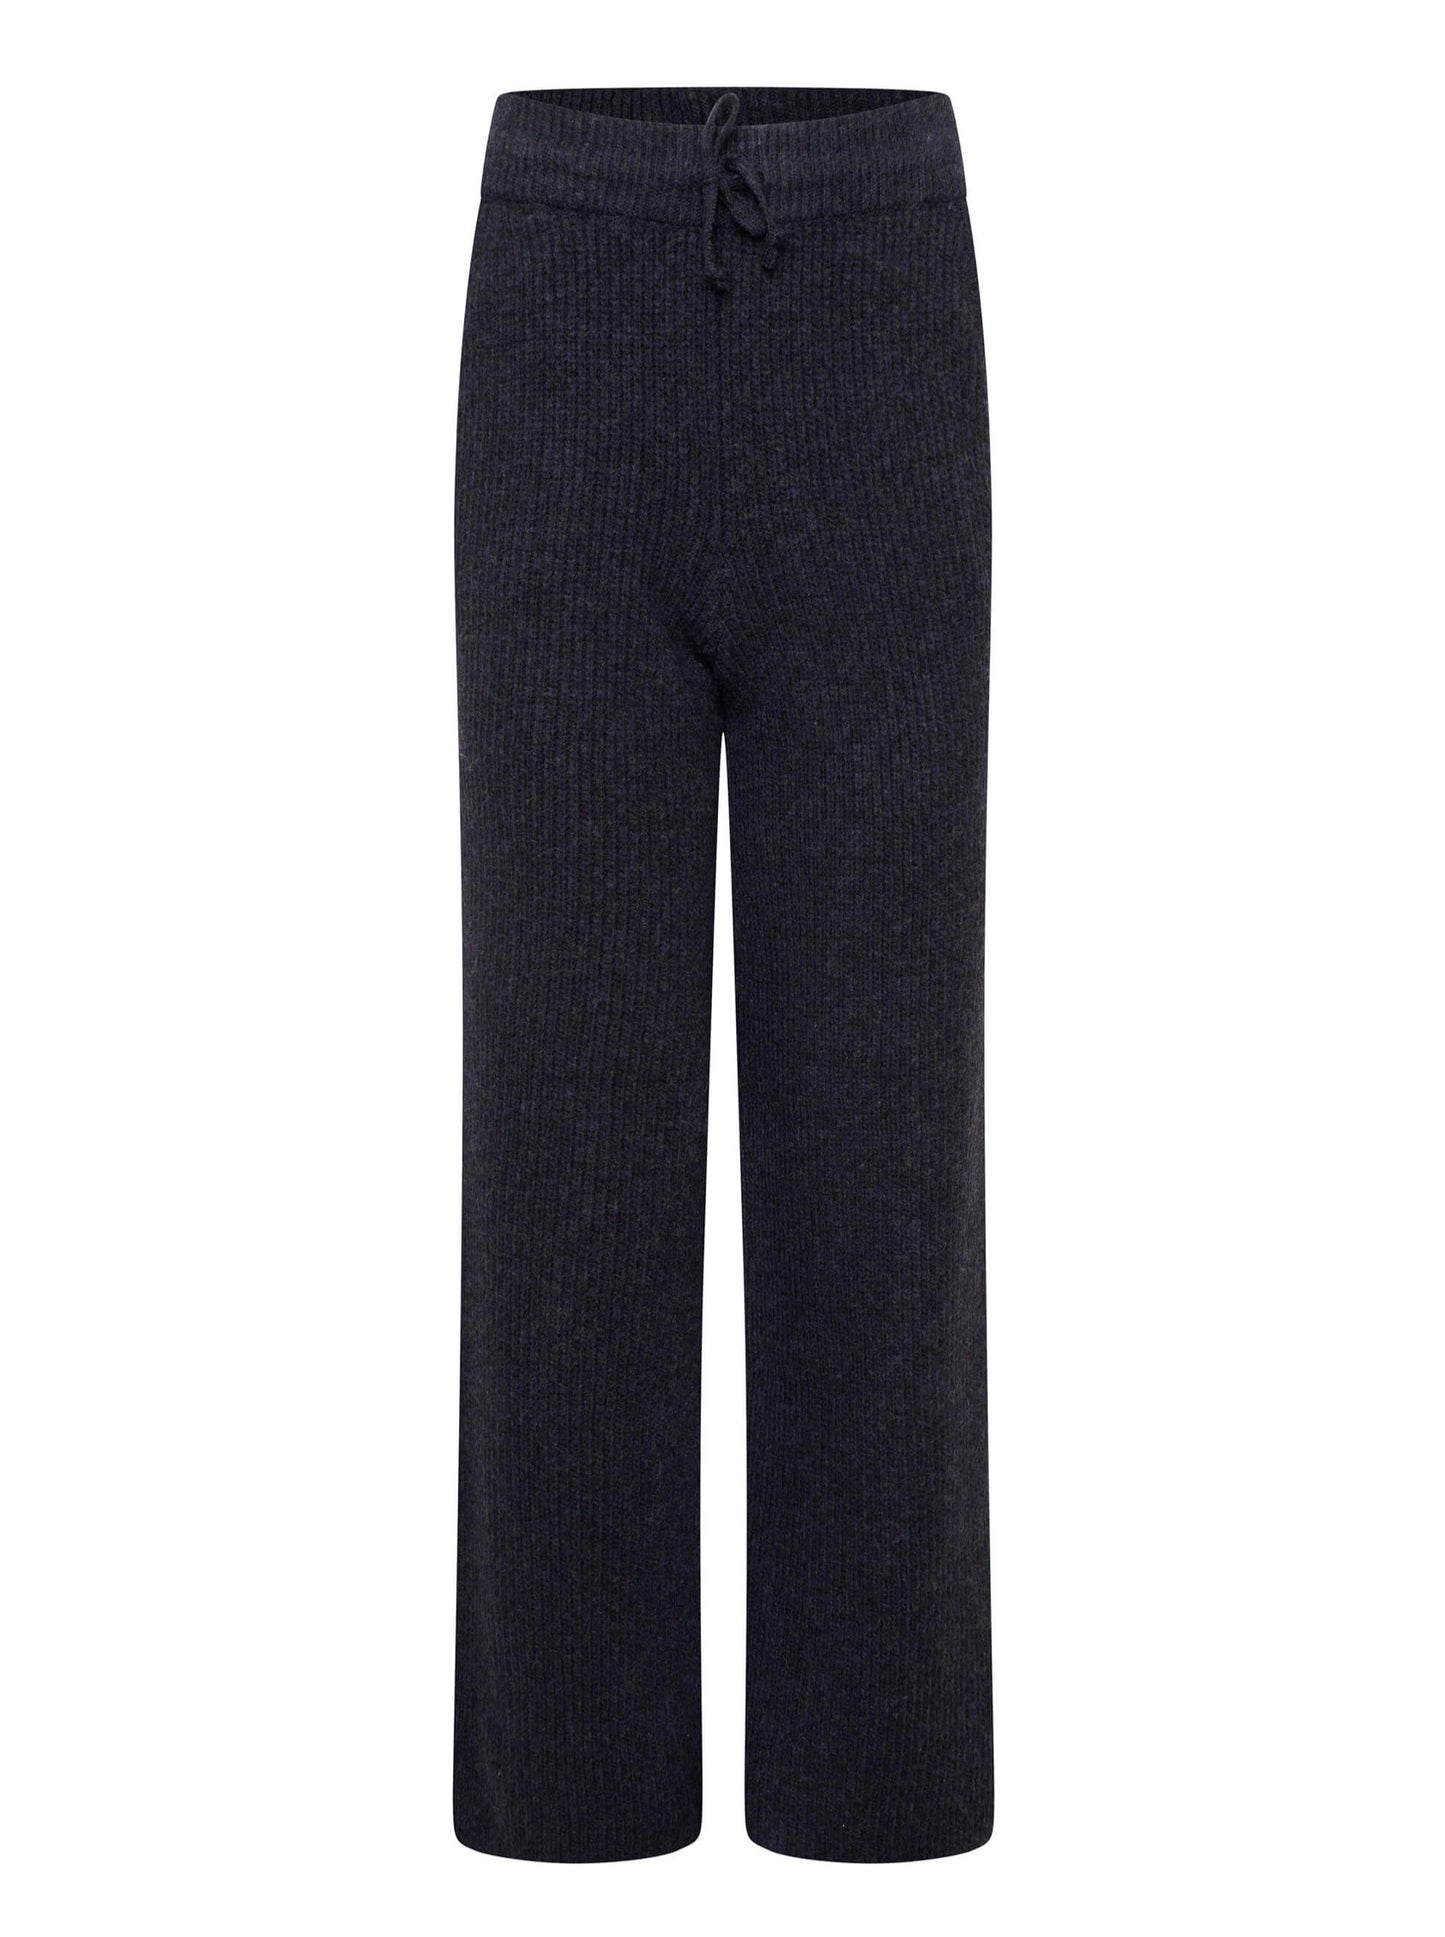 'CAMILLE' RIBBED DETAIL KNITTED WIDE LEG TROUSERS NAVY